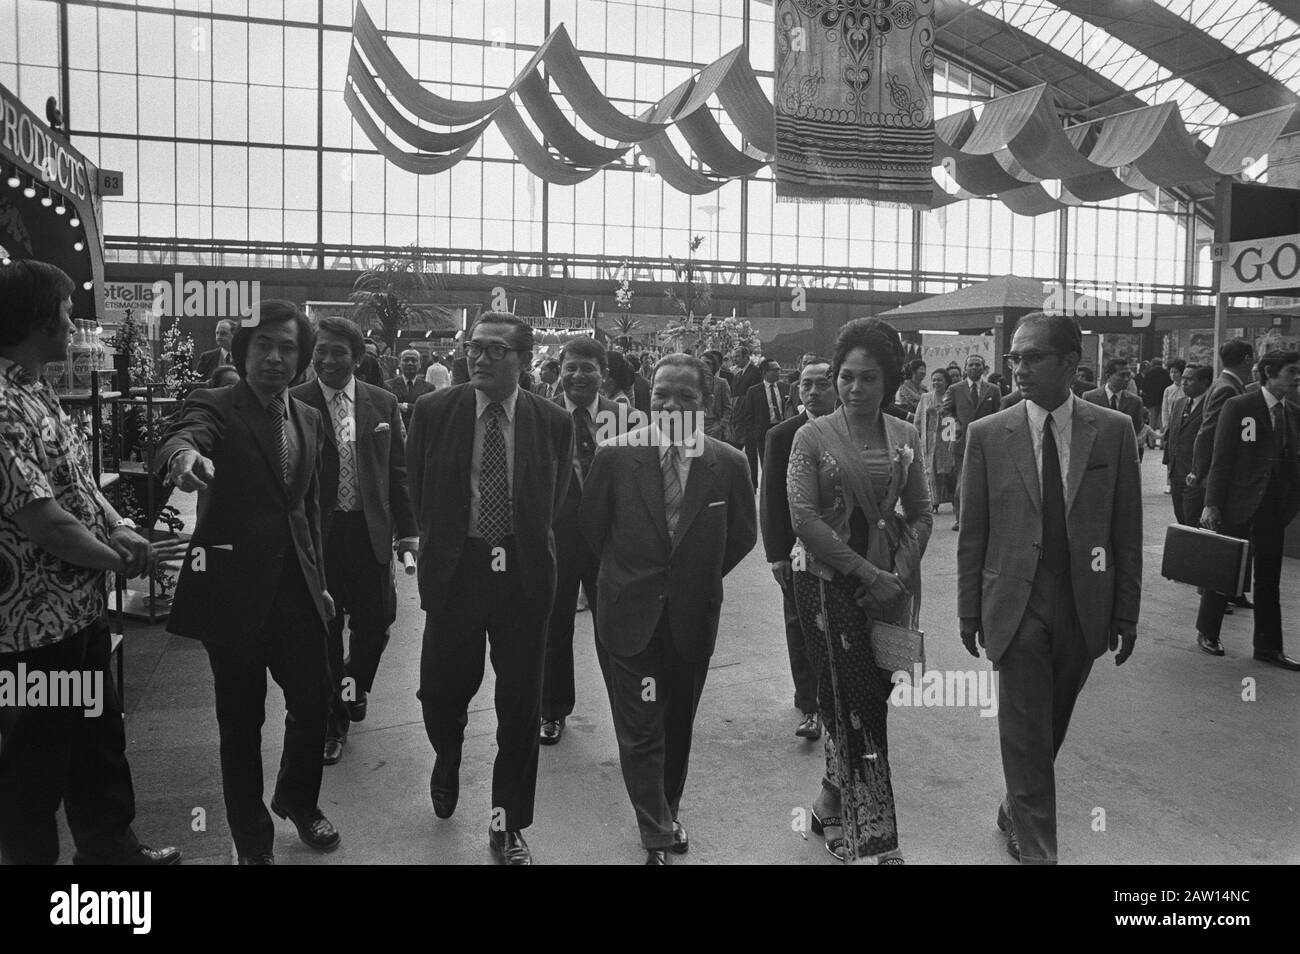 Opening of the Pasar Malam in 1972 in the RAI building in Amsterdam  Reception of the Indonesian ambassador H. Alamsjah (m) Date: June 1, 1972  Location: Amsterdam, Noord-Holland Keywords: bazaars, diplomats, markets,